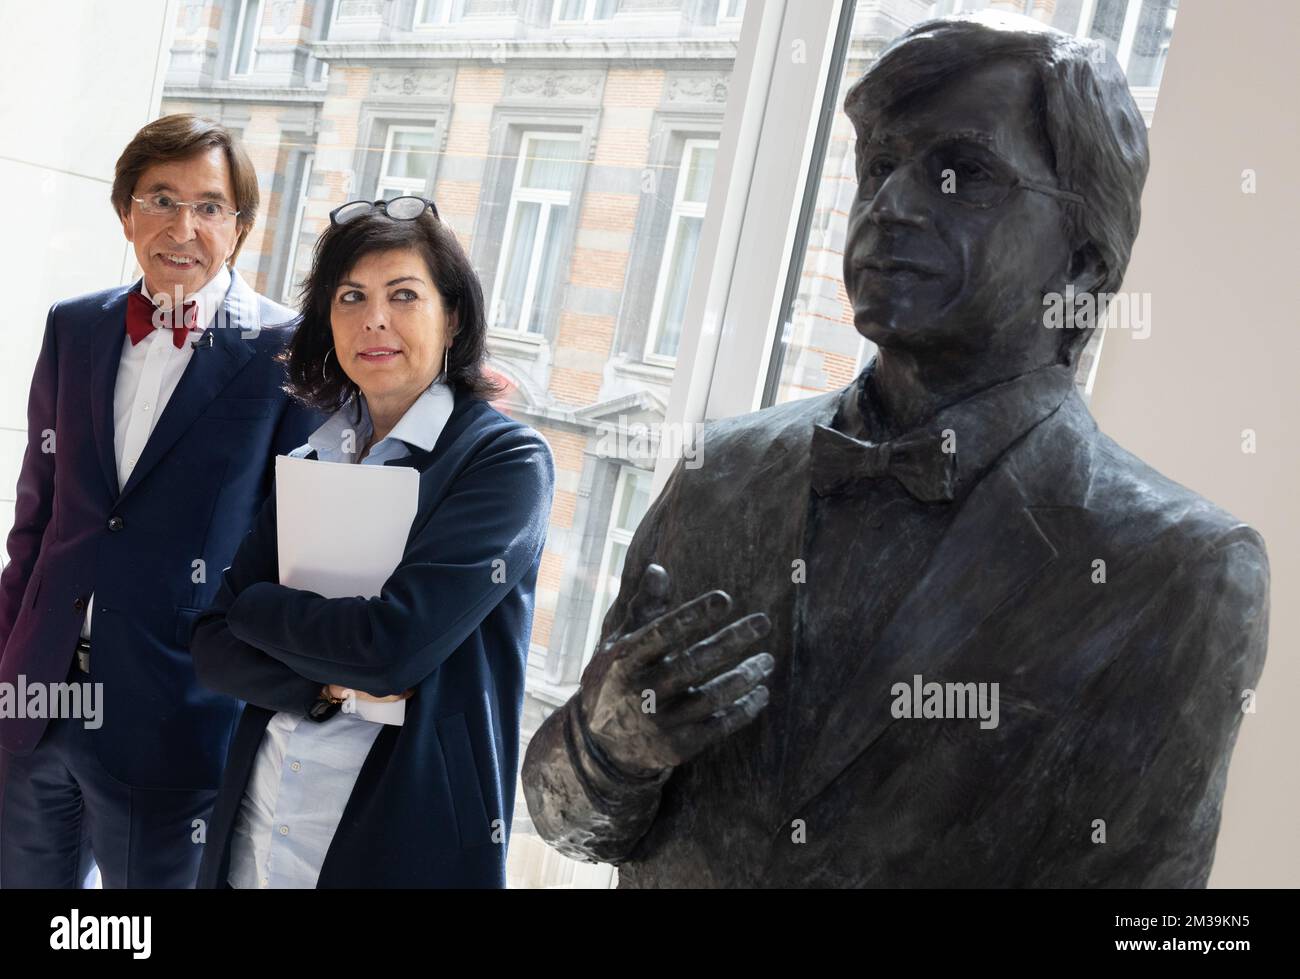 Walloon Minister President Elio Di Rupo and Joelle Milquet pictured during the inauguration of a sculpture of Walloon Minister President and former Prime Minister Elio Di Rupo, Friday 22 April 2022 at the Chamber at the Federal Parliament in Brussels. BELGA PHOTO BENOIT DOPPAGNE Stock Photo